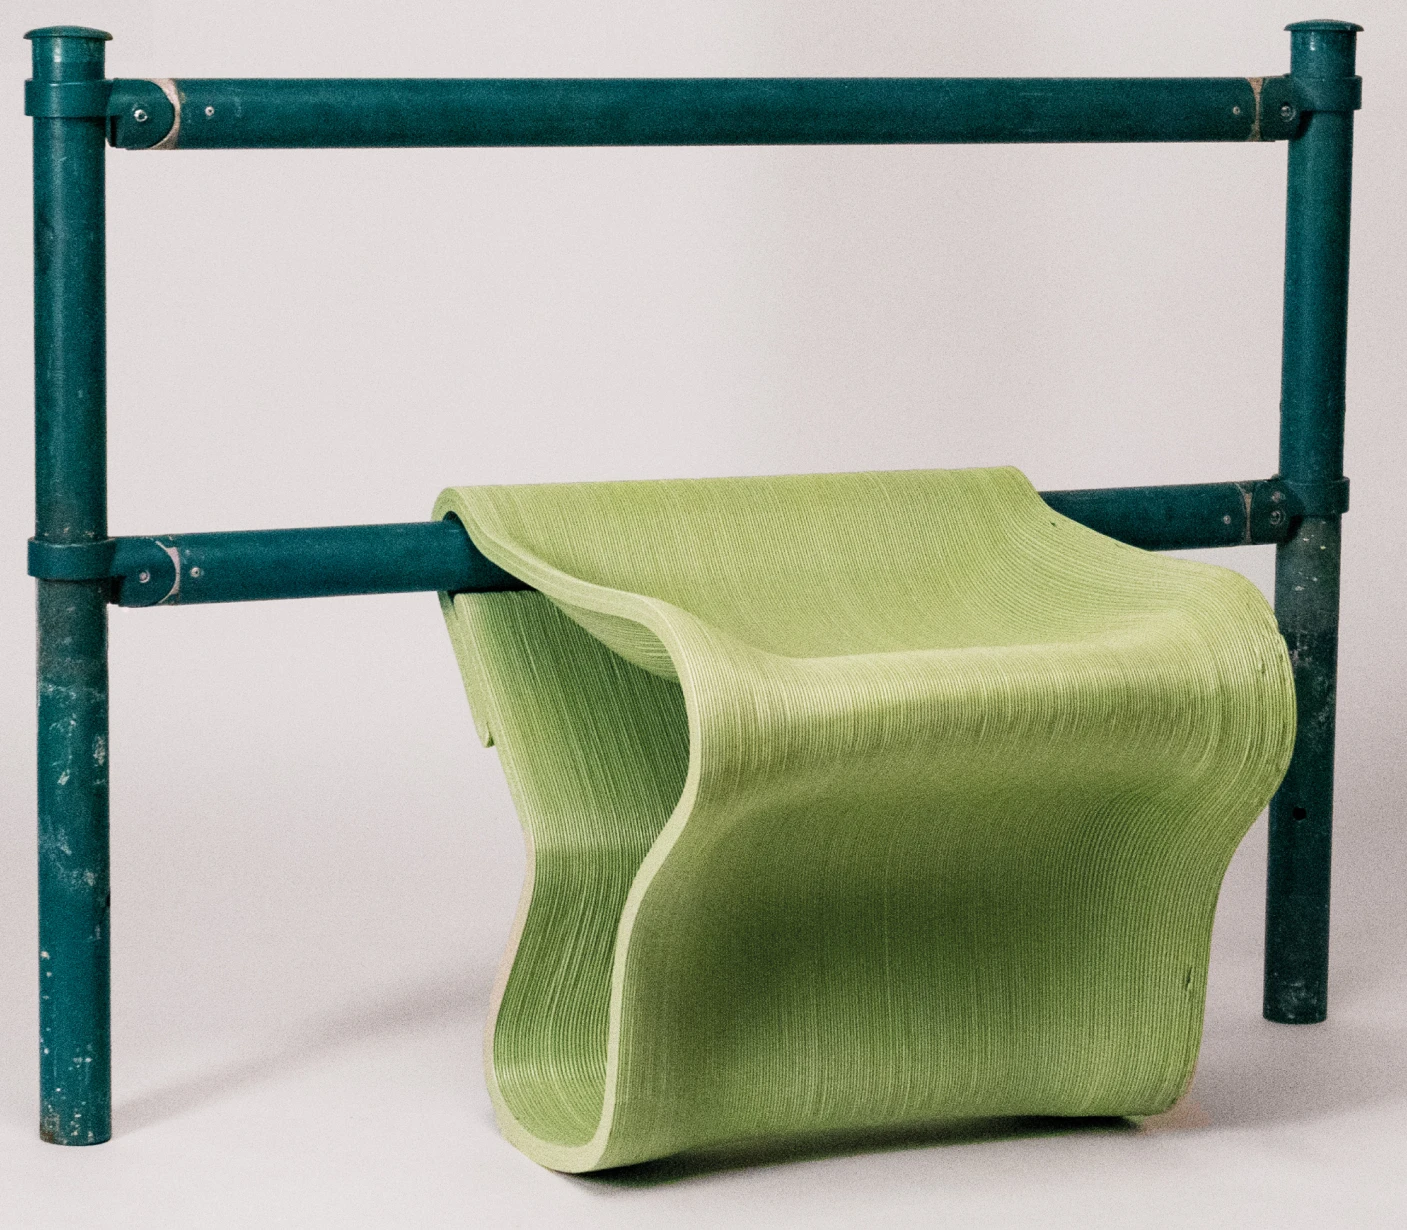 A Morari Stool in Green attatched to a bus stop railing